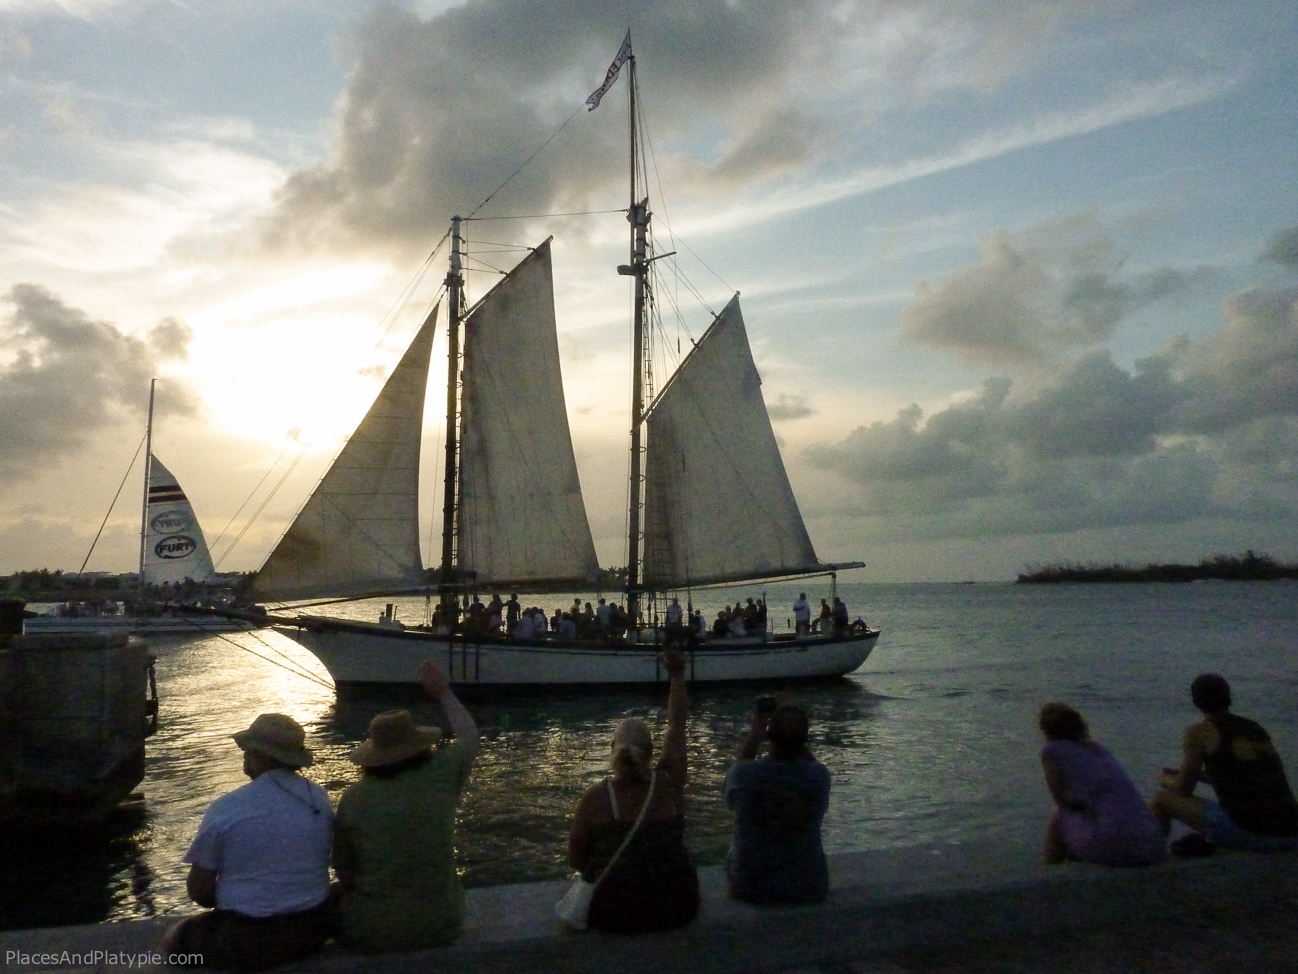 A boatload of tourists passes Mallory Square, where several thousand visitors watch performers as they wait for the 